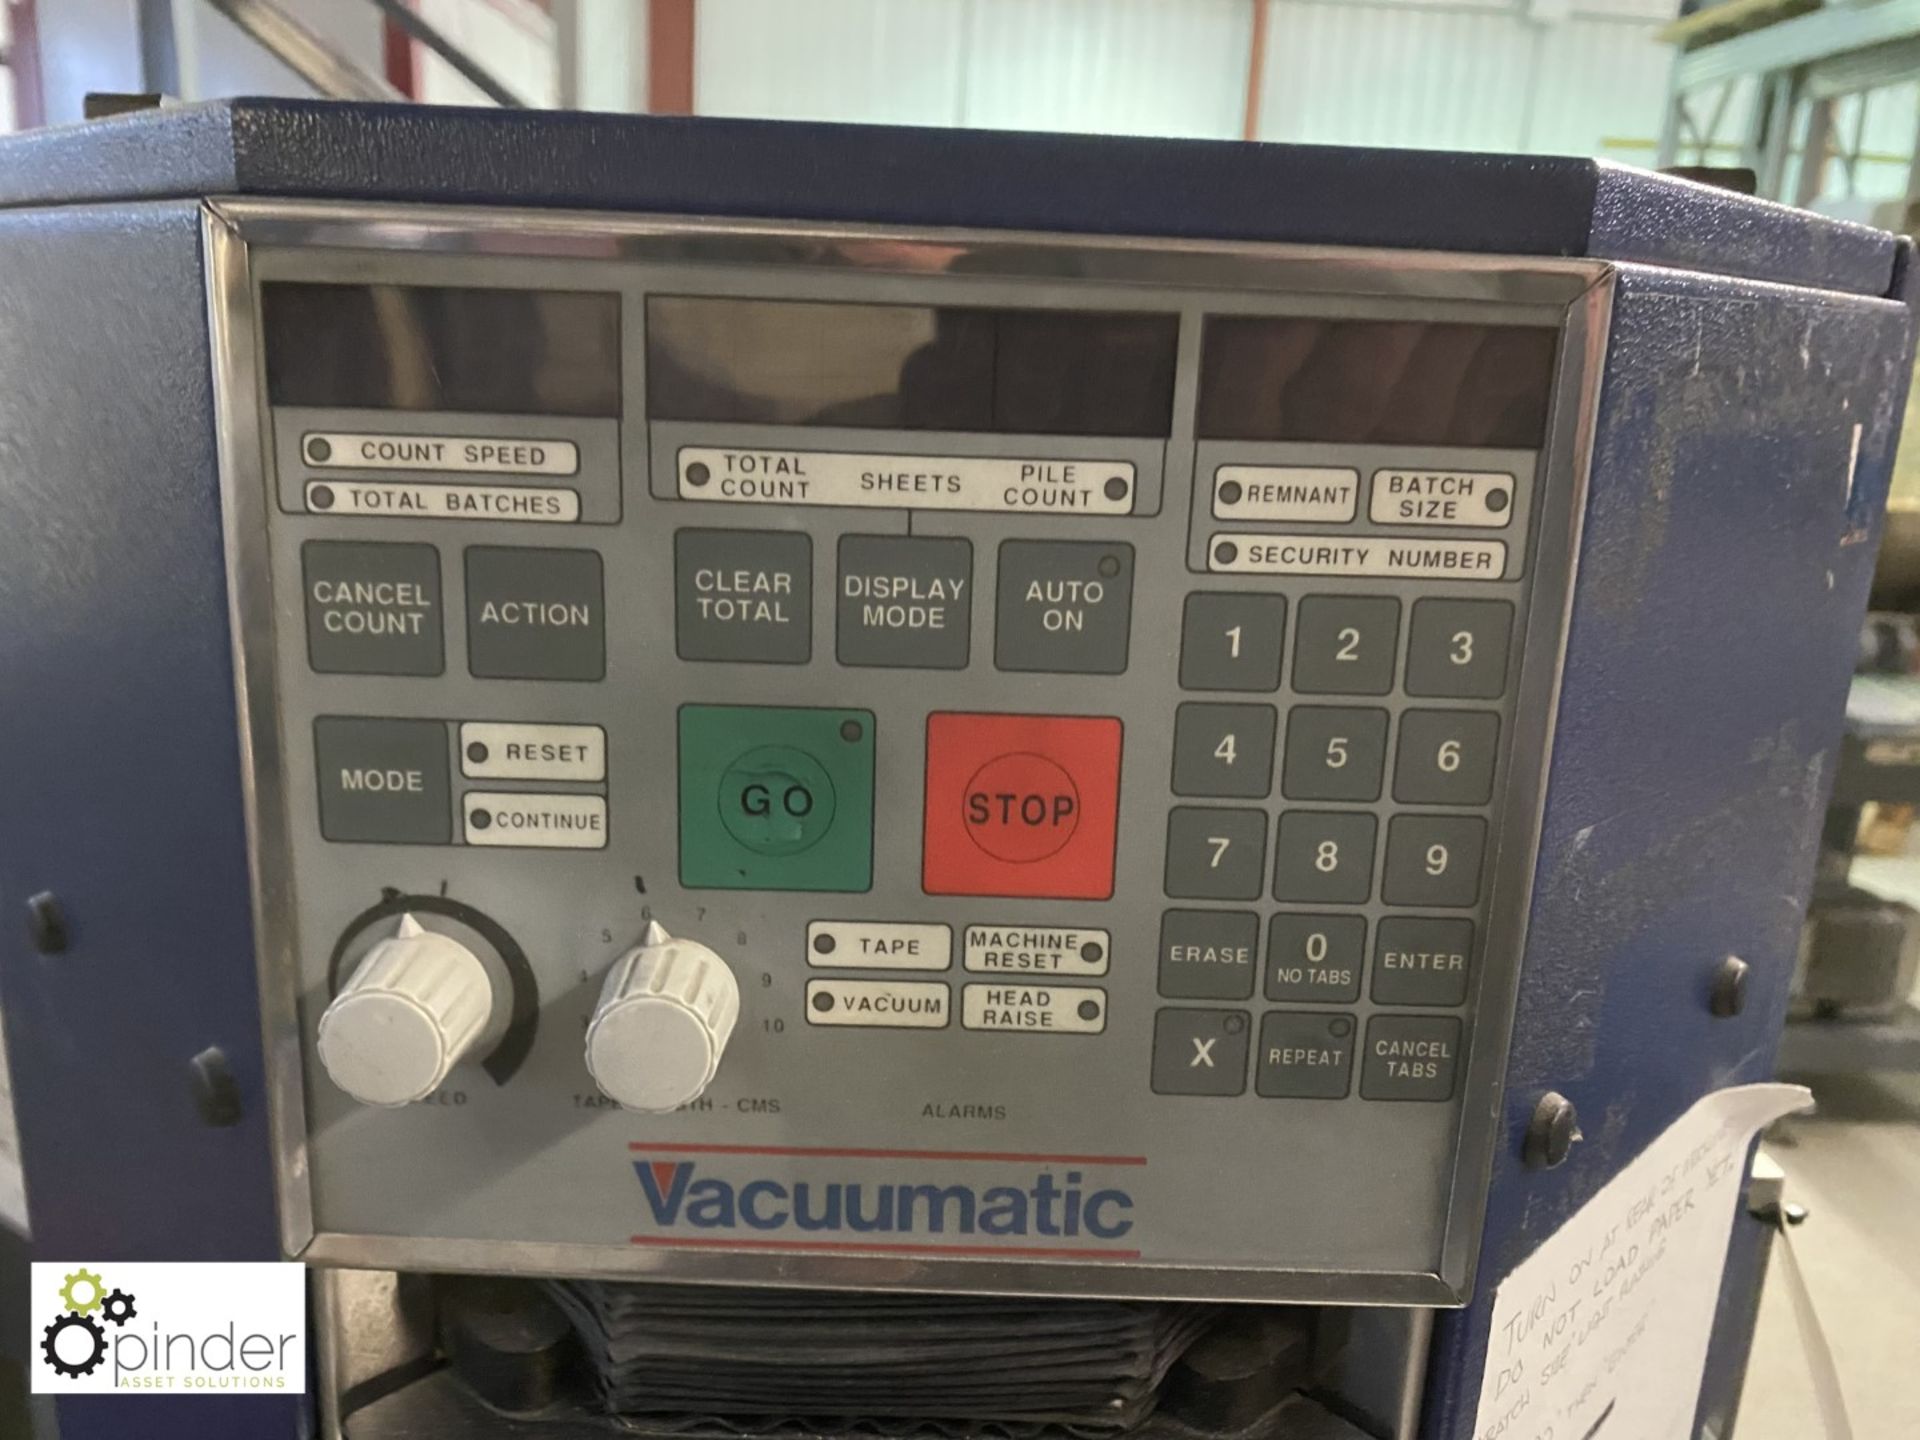 Vacuumatic Vicount Sheet Counter and Tabber, 240volts, serial number 14239 - Image 4 of 8